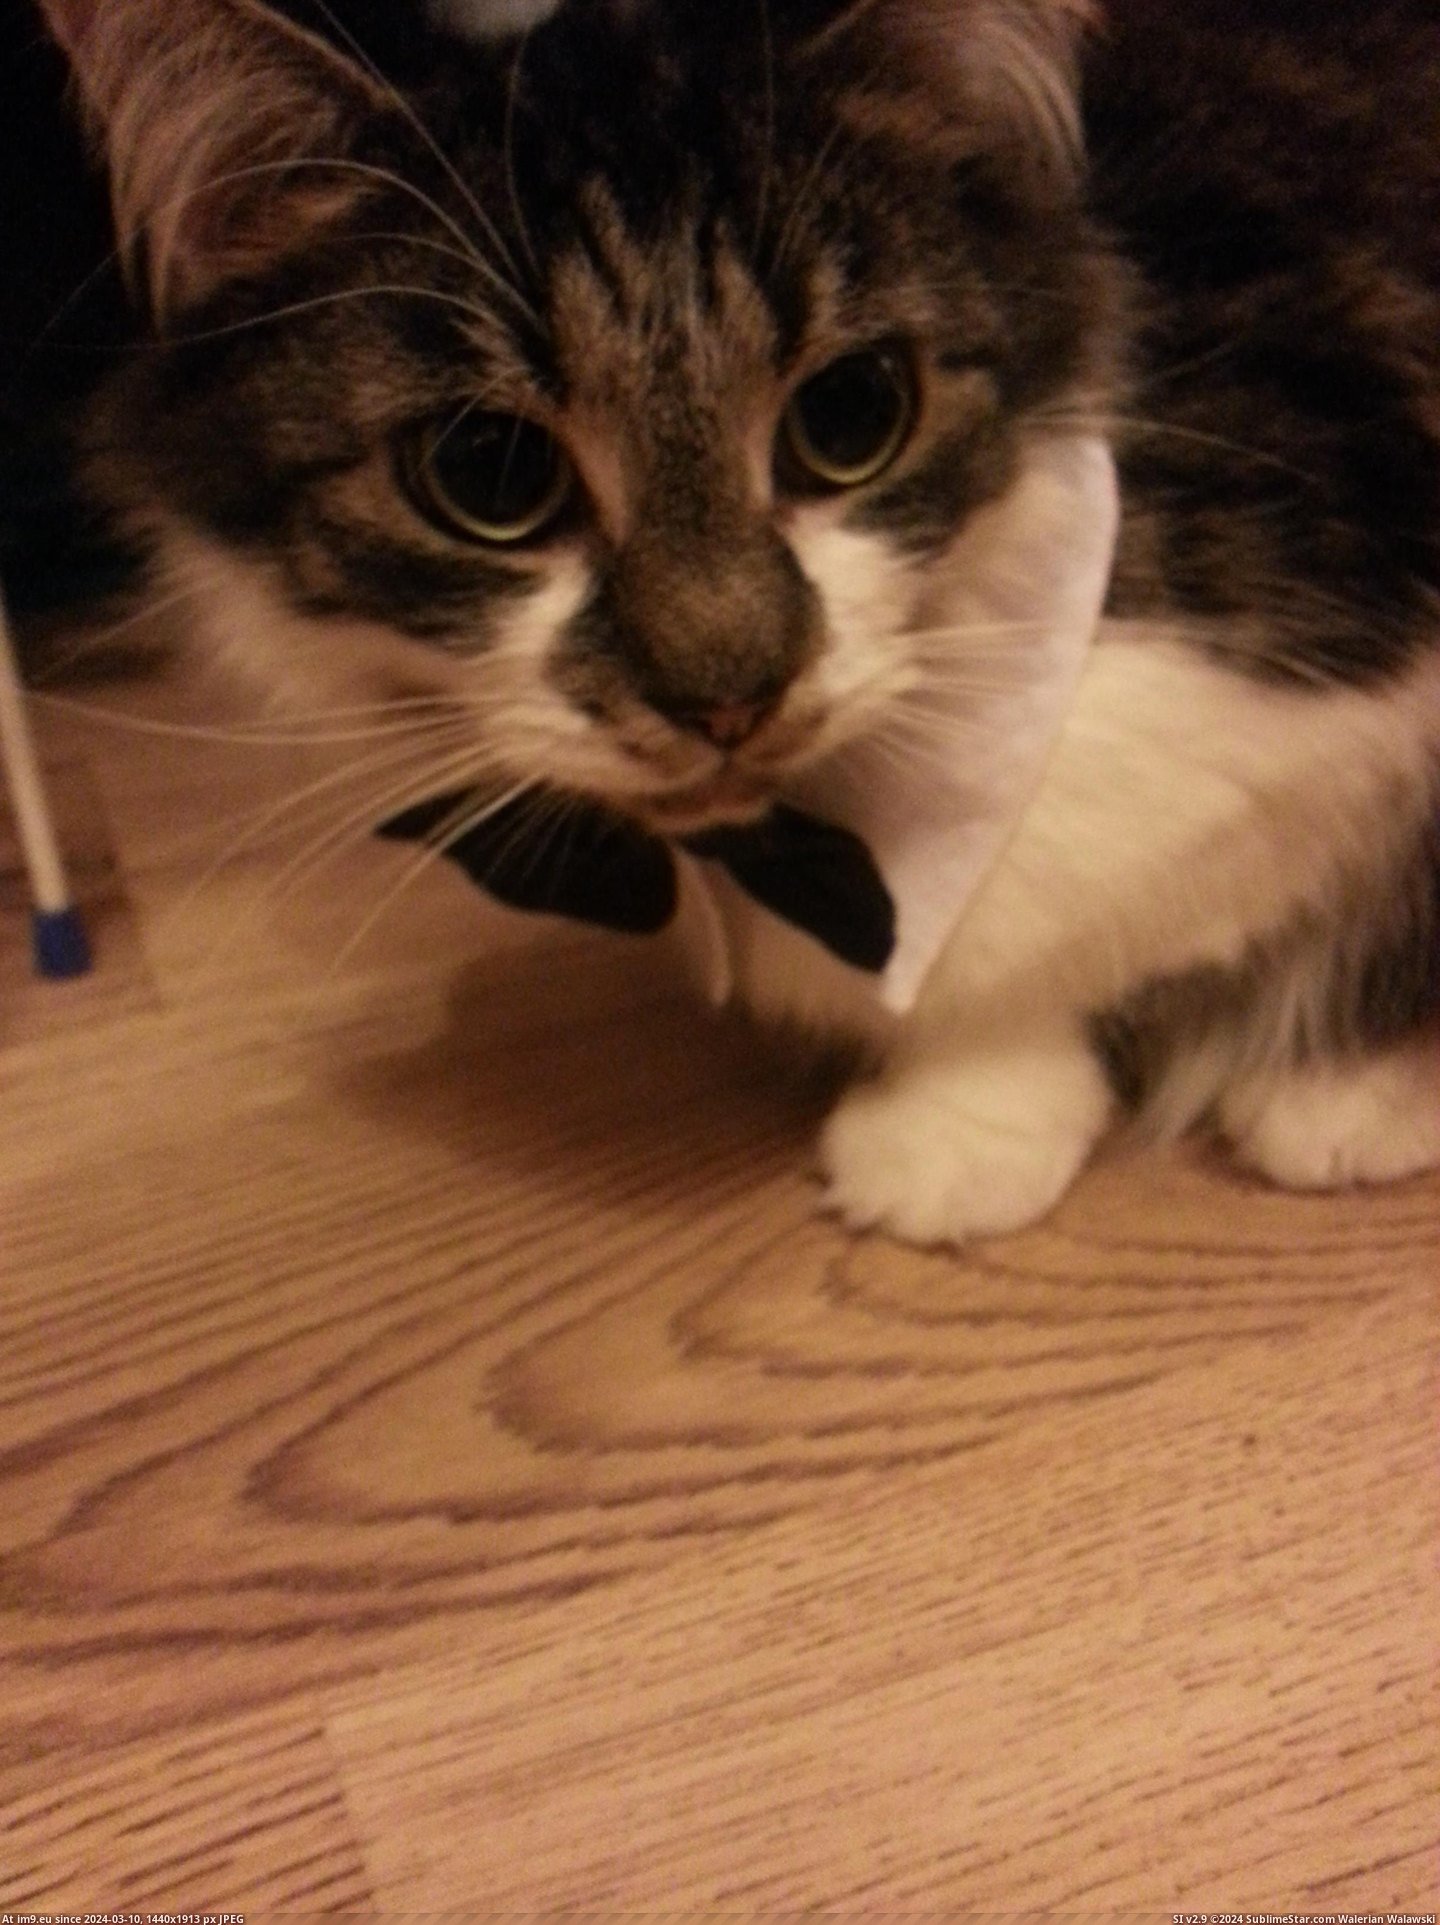 #Cats #For #Dapper #Christmas #Ready [Cats] Looking dapper ready for Christmas Pic. (Image of album My r/CATS favs))